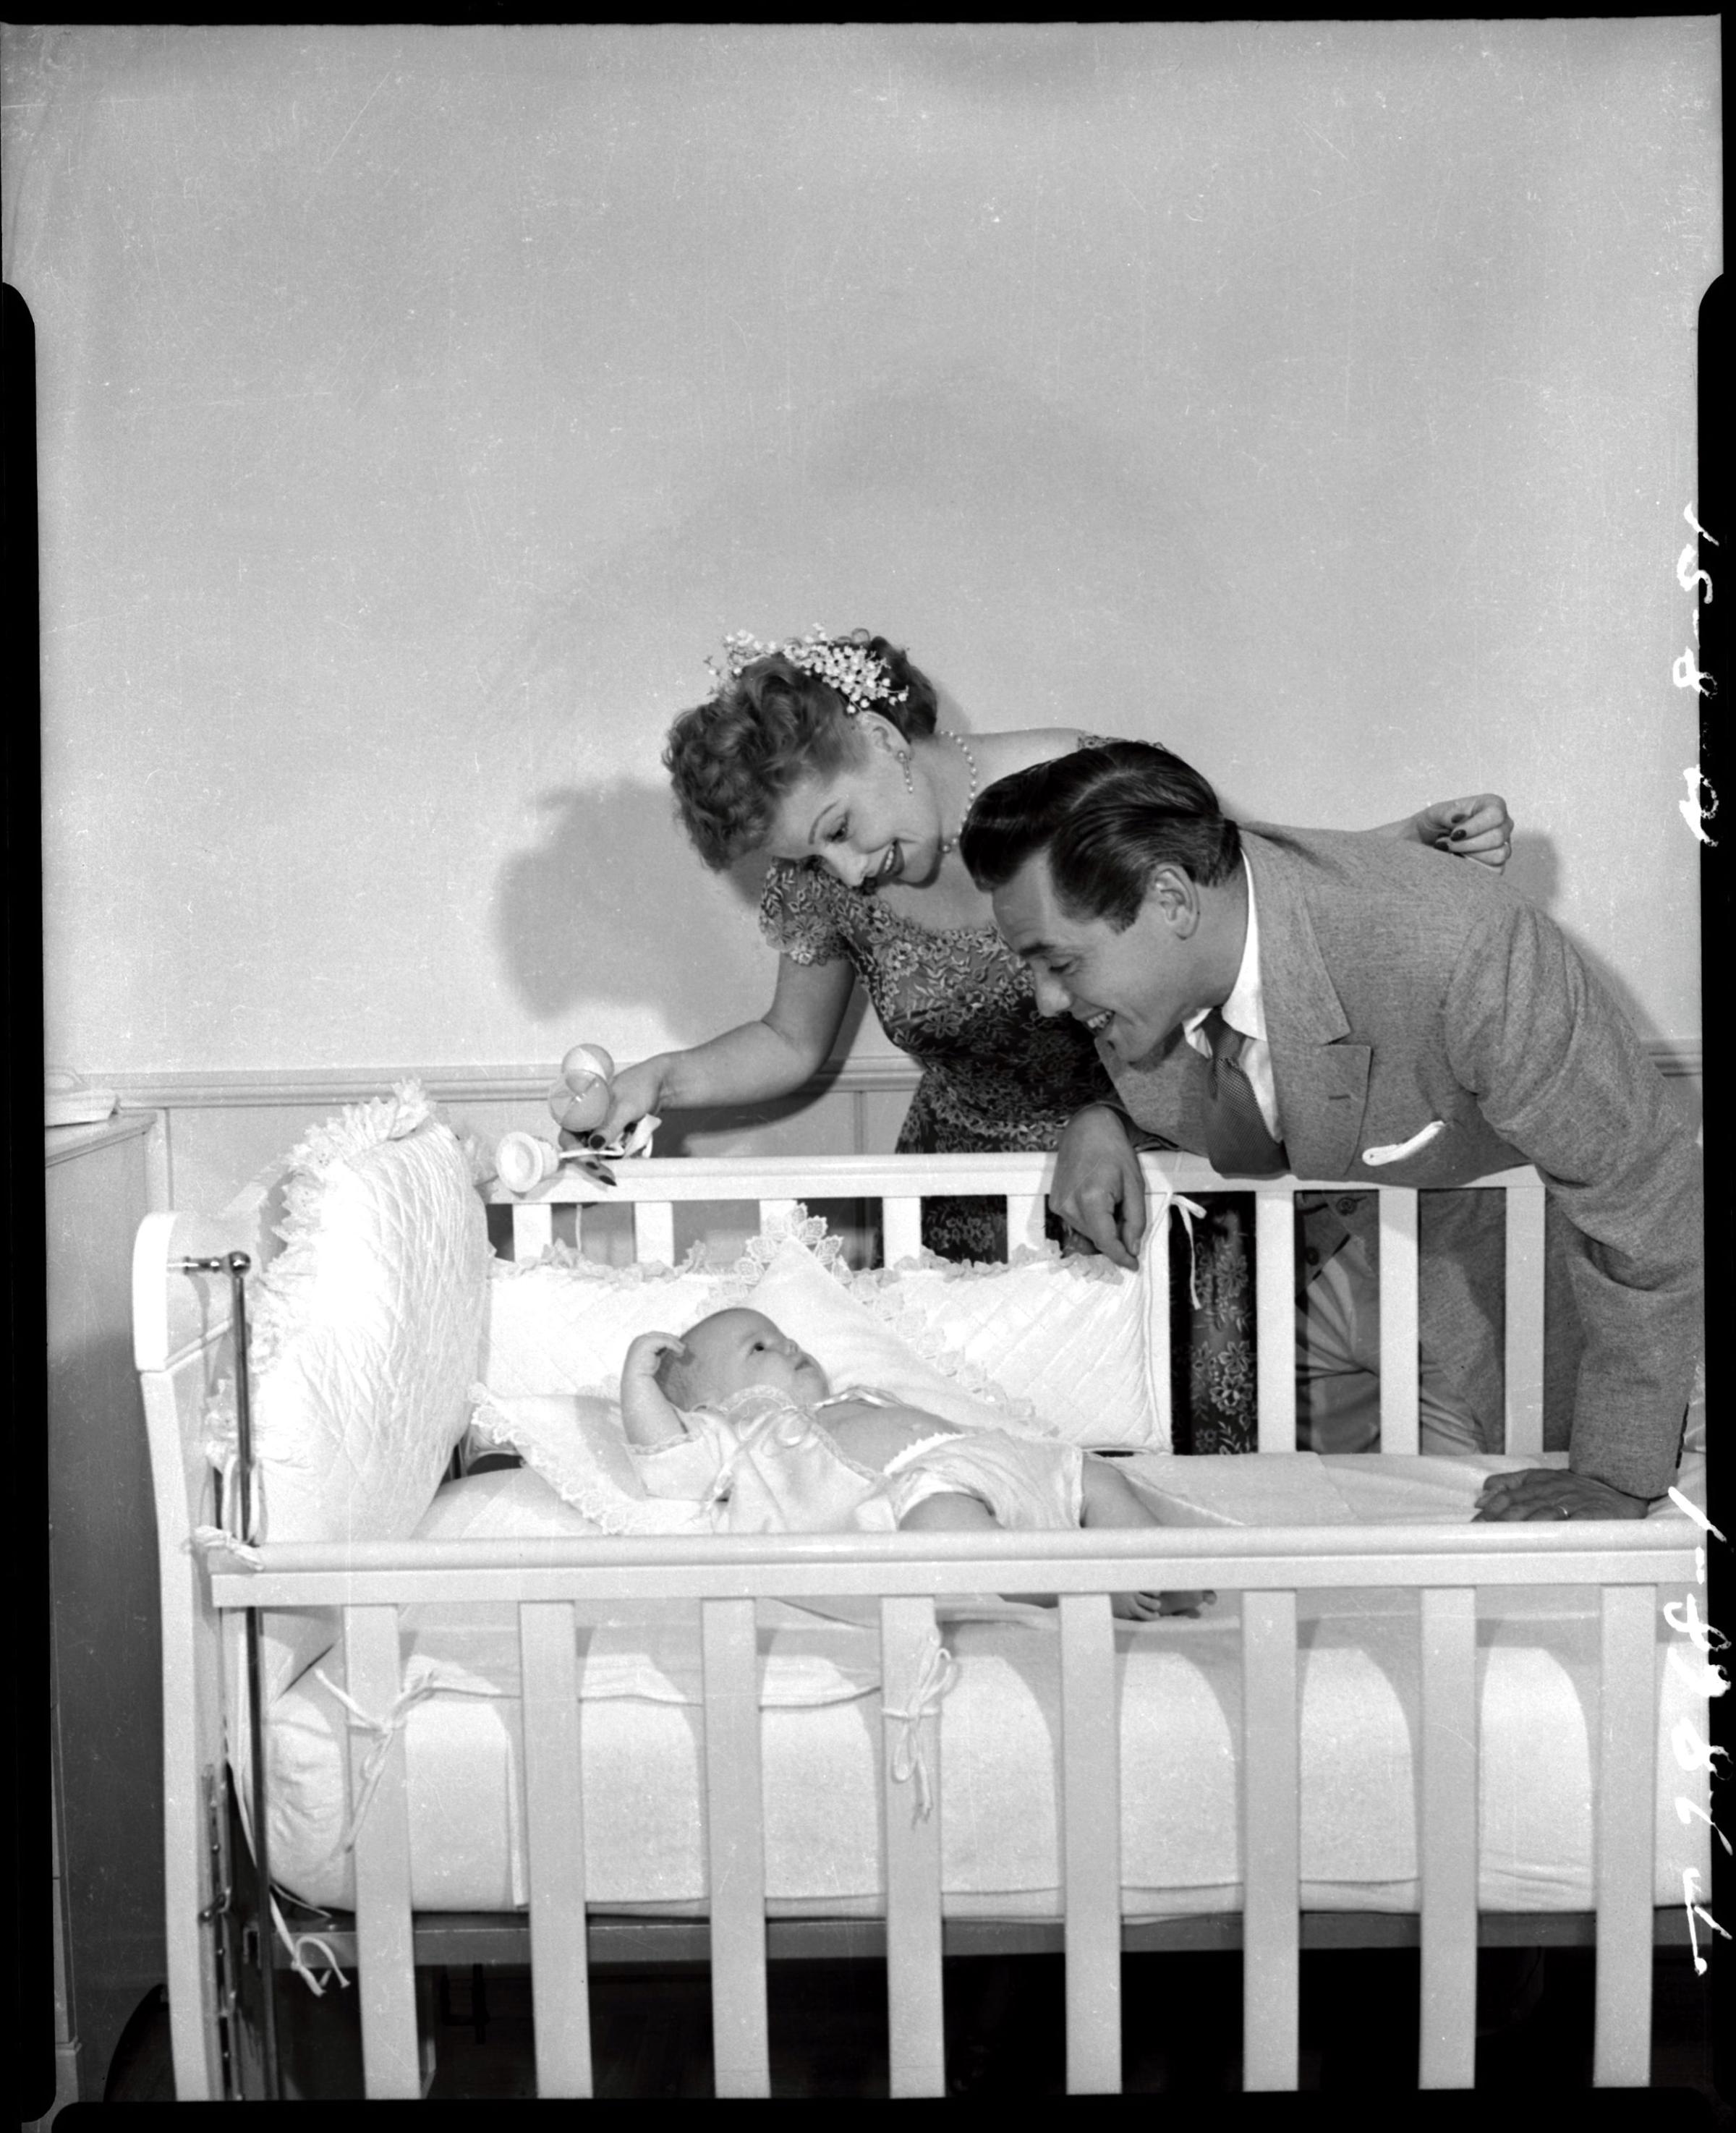 "I Love Lucy" promotional shot of Lucille Ball and Desi Arnaz and their child, Lucy Desiree Arnaz.